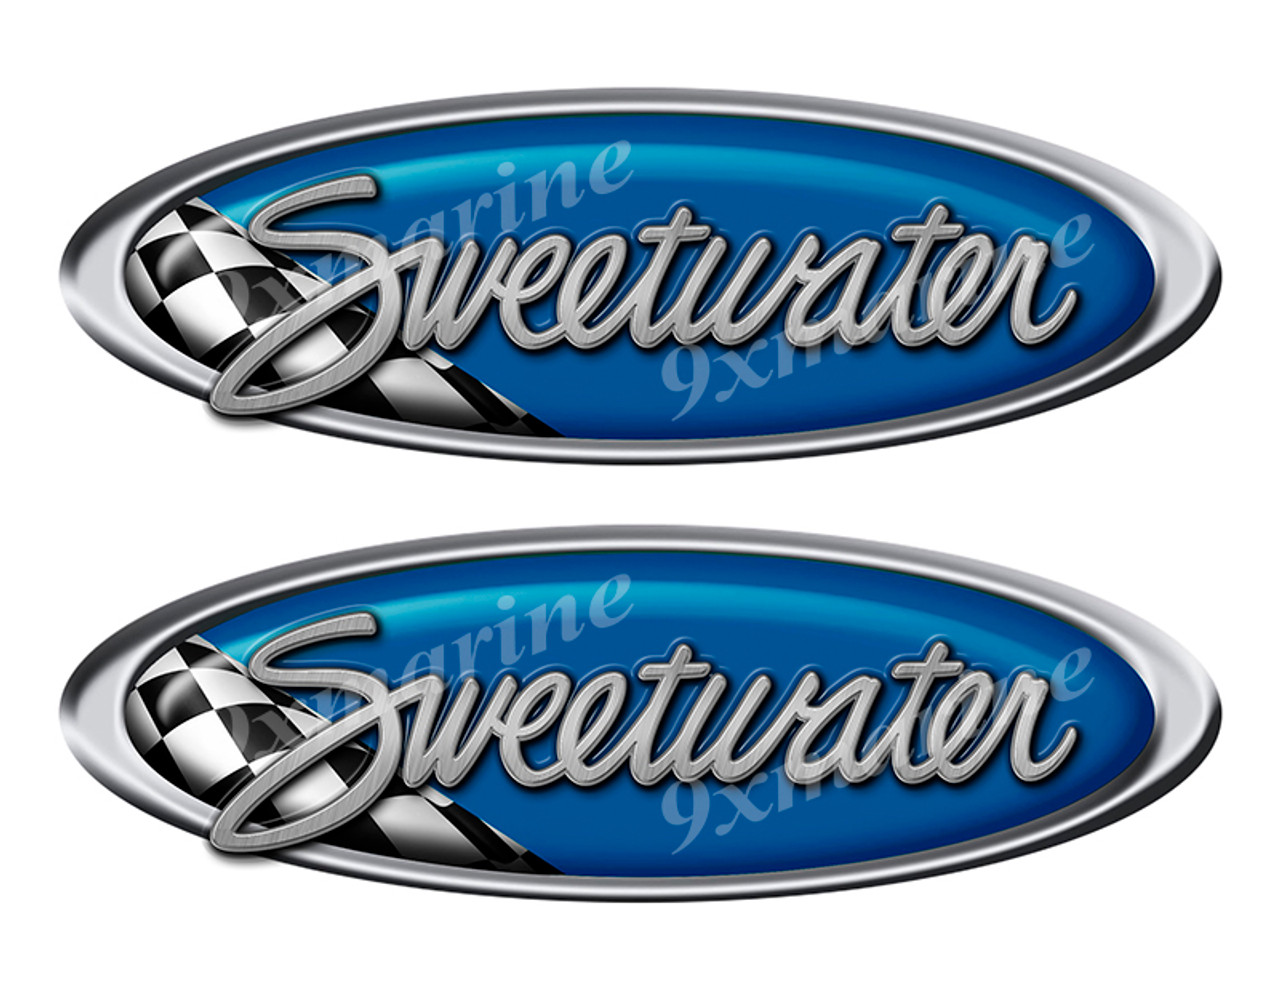 2 Sweetwater Vinyl Racing Oval Stickers - 10" long